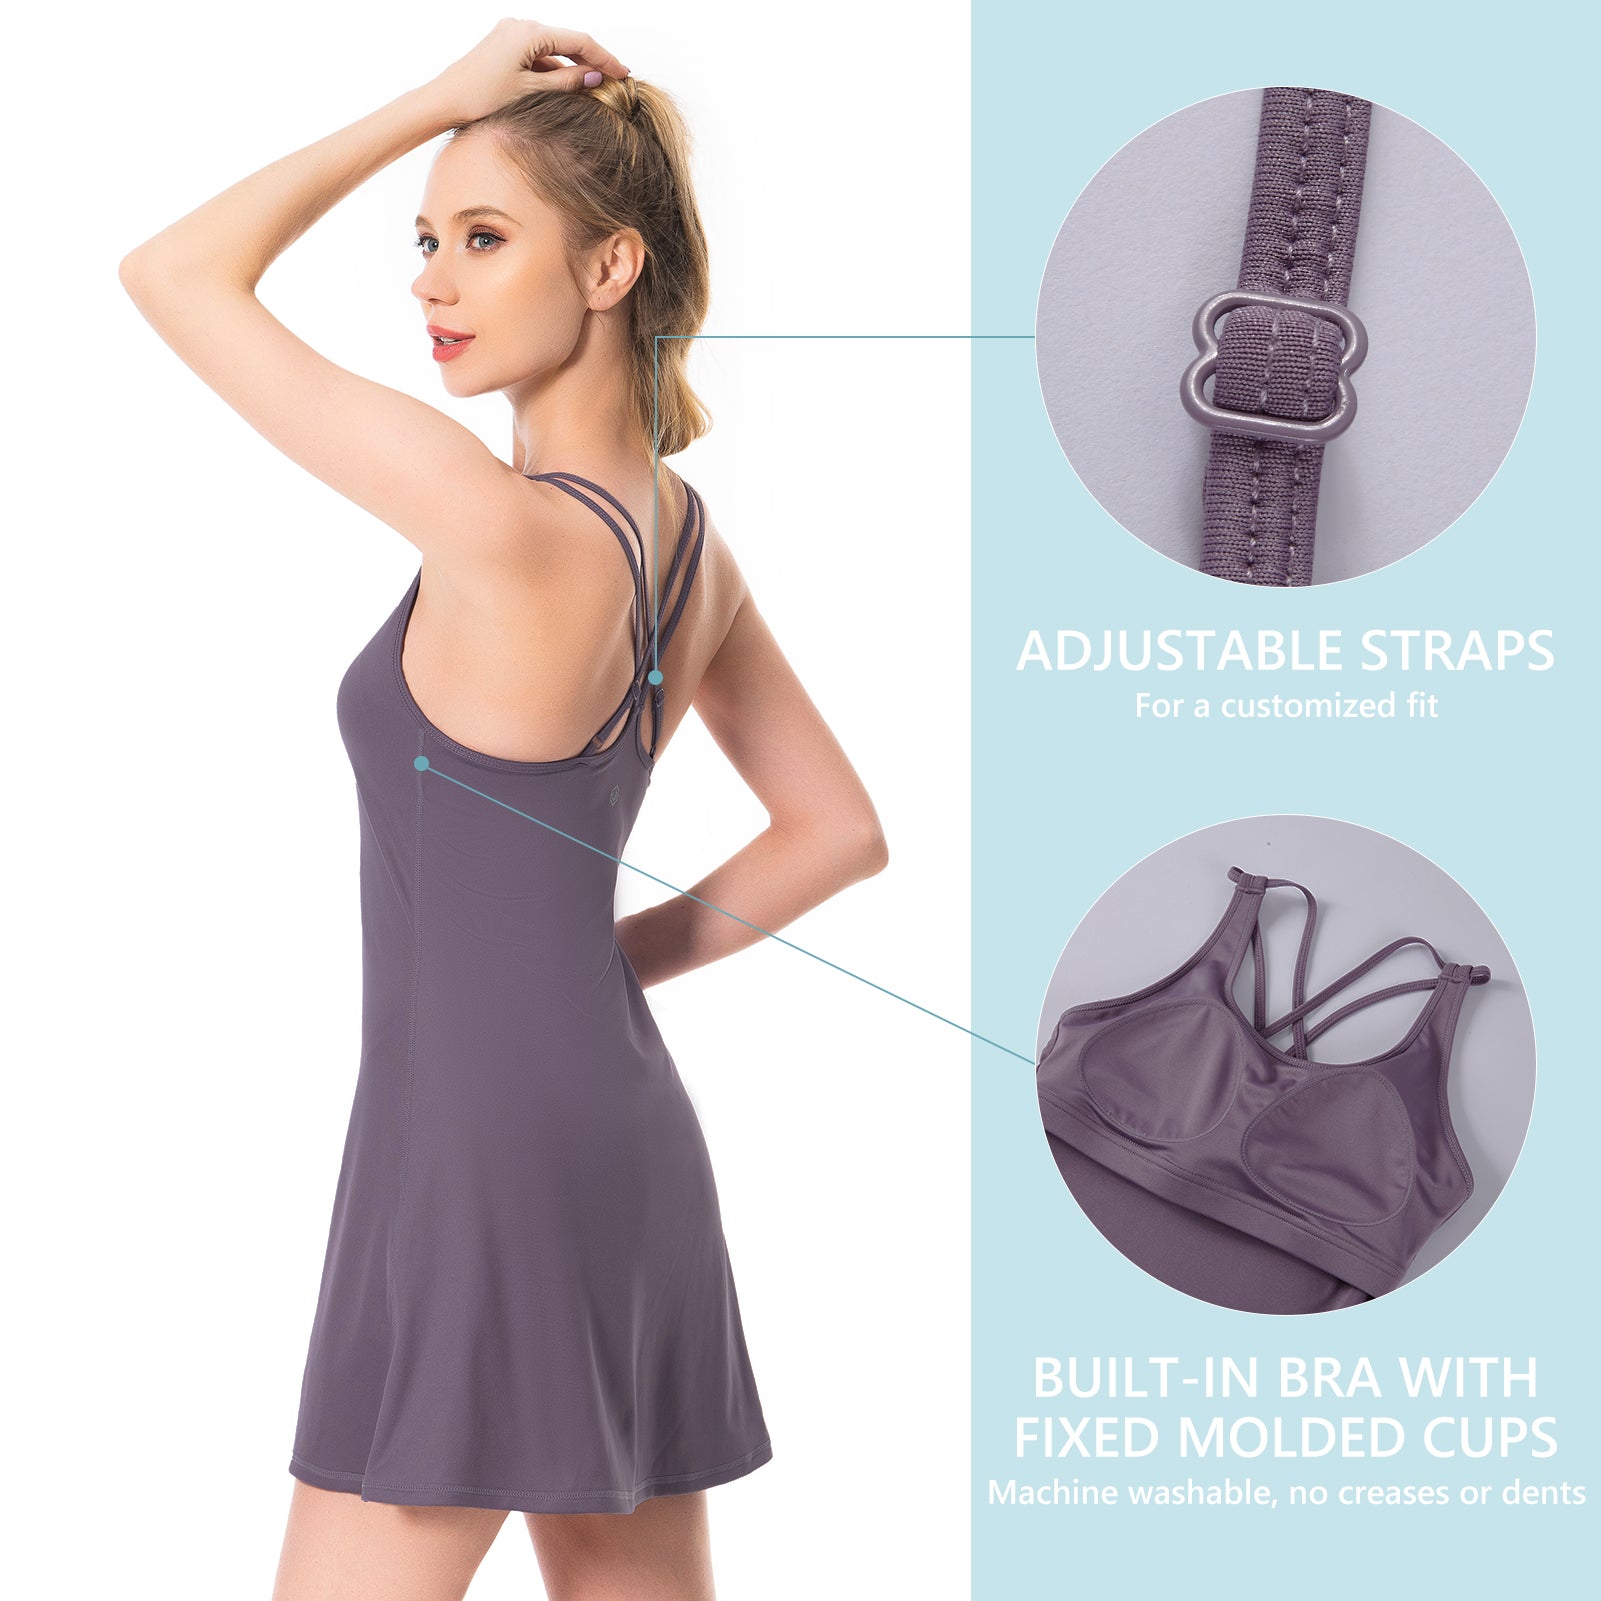 Tennis Dress With Built In Bra And Shorts